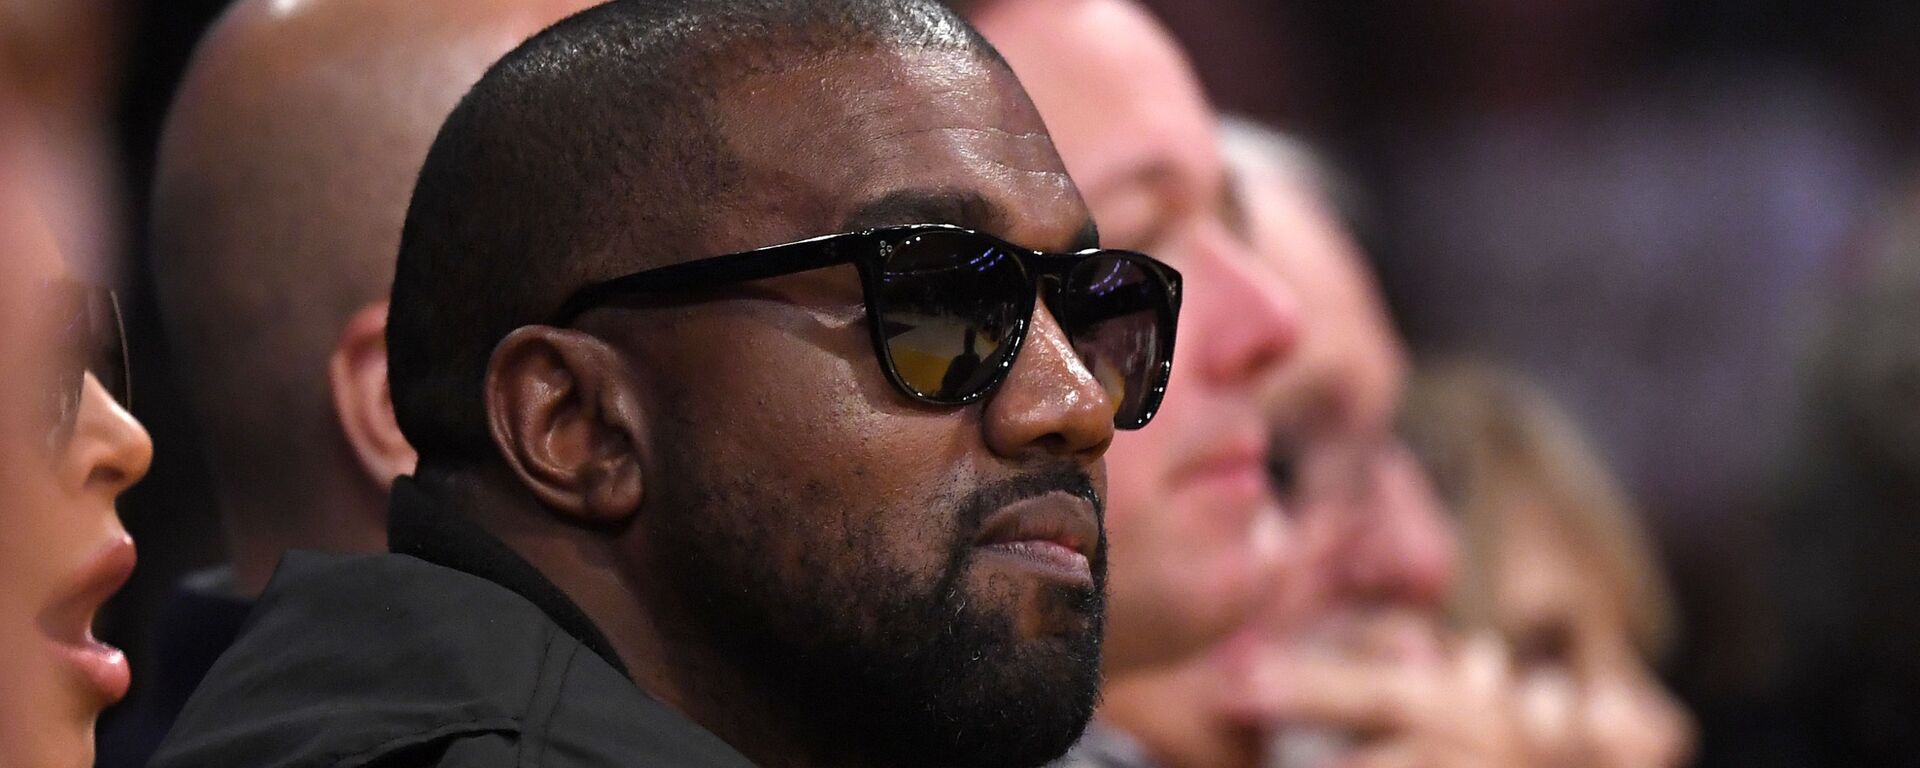 In this Jan. 13, 2020 file photo, Rapper Kanye West watches during the second half of an NBA basketball game between the Los Angeles Lakers and the Cleveland Cavaliers in Los Angeles. Drawings by West from when the rapper was a high school student in Chicago are now worth thousands of dollars, according to an appraiser. - Sputnik International, 1920, 13.10.2022